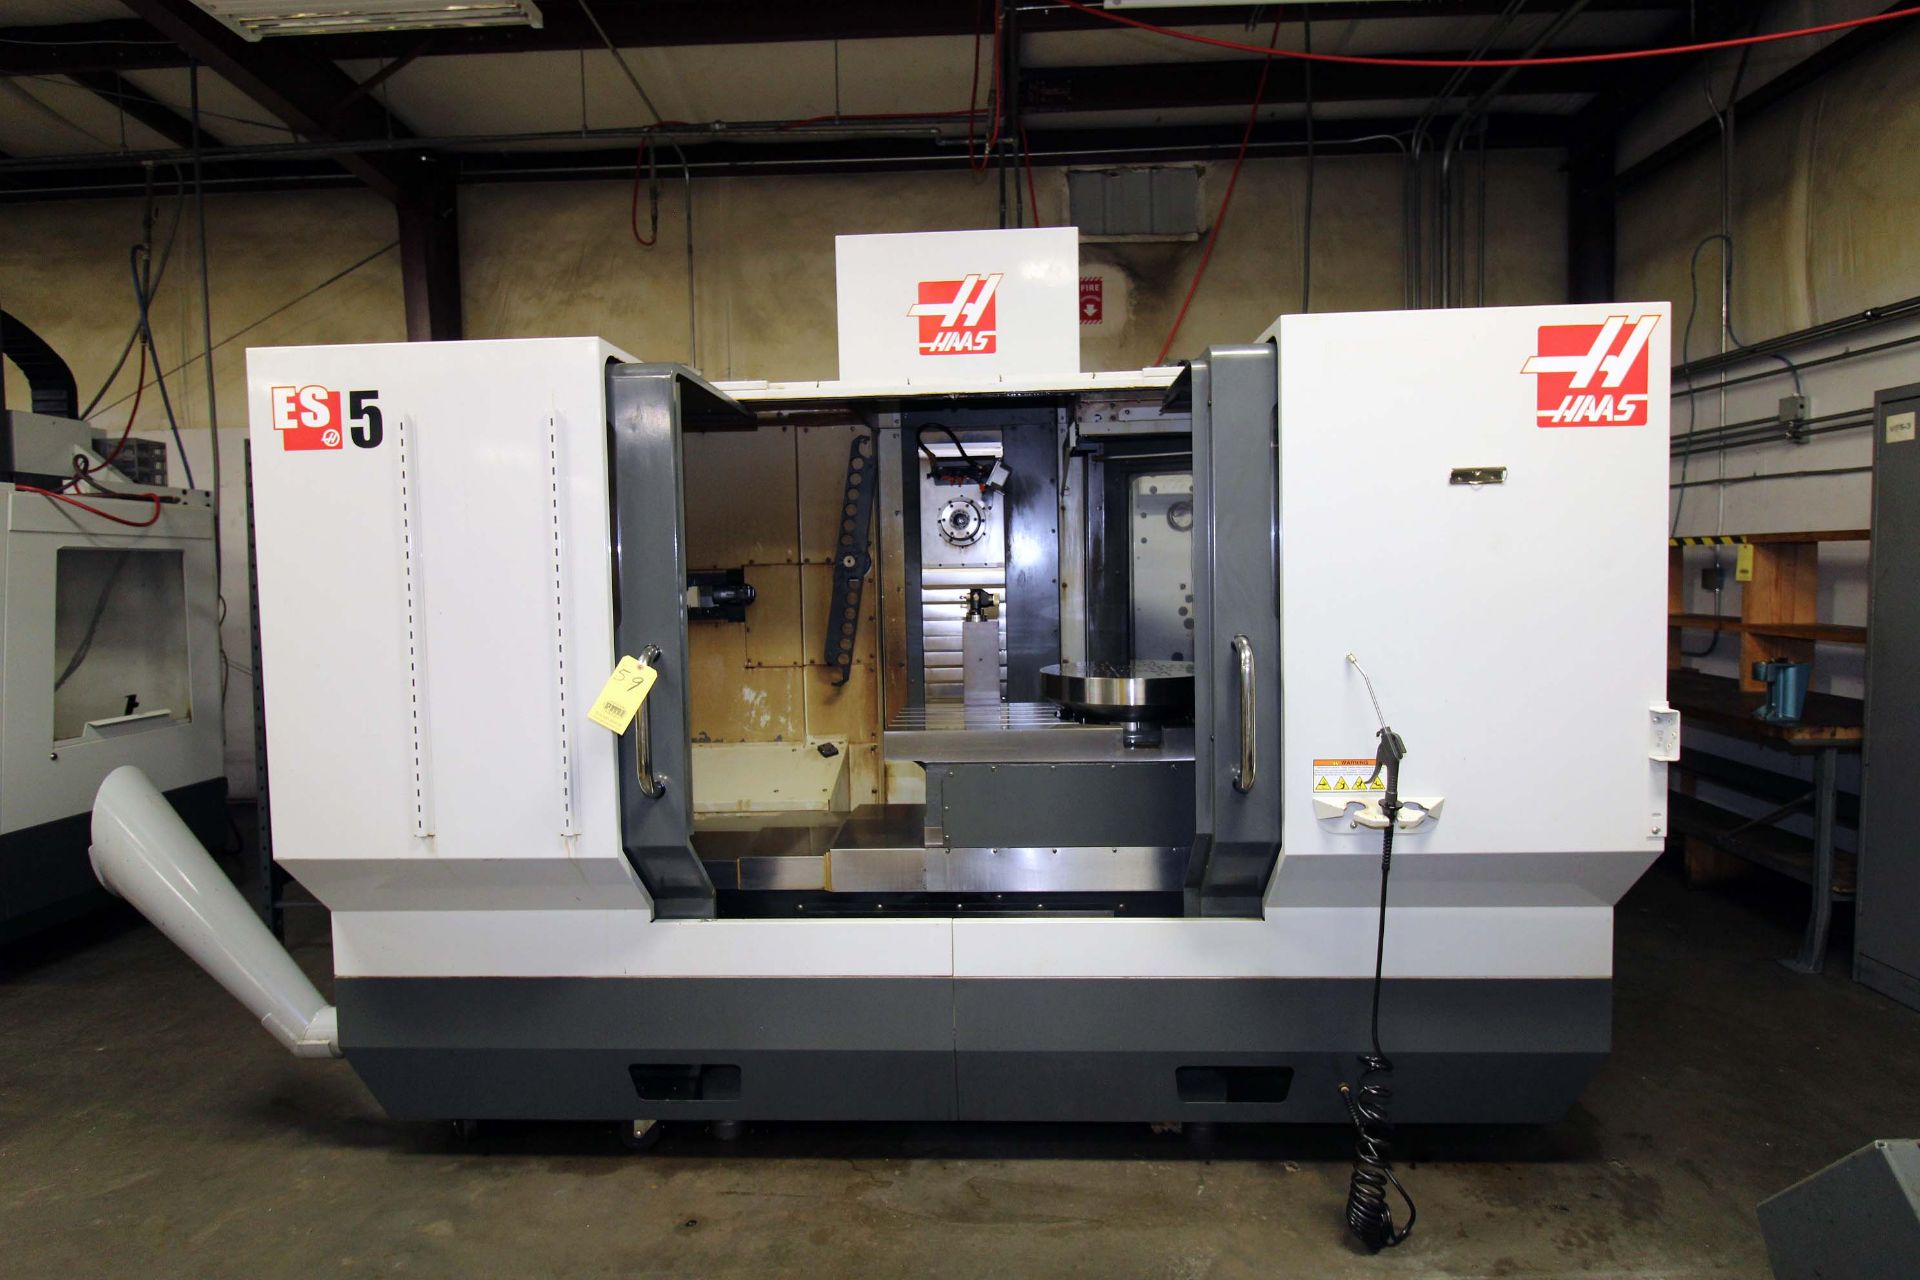 4-AXIS HORIZONTAL MACHINING CENTER, HAAS MDL. ES5-4AX, new 10/2011, 20” x 52” fixed table w/12”